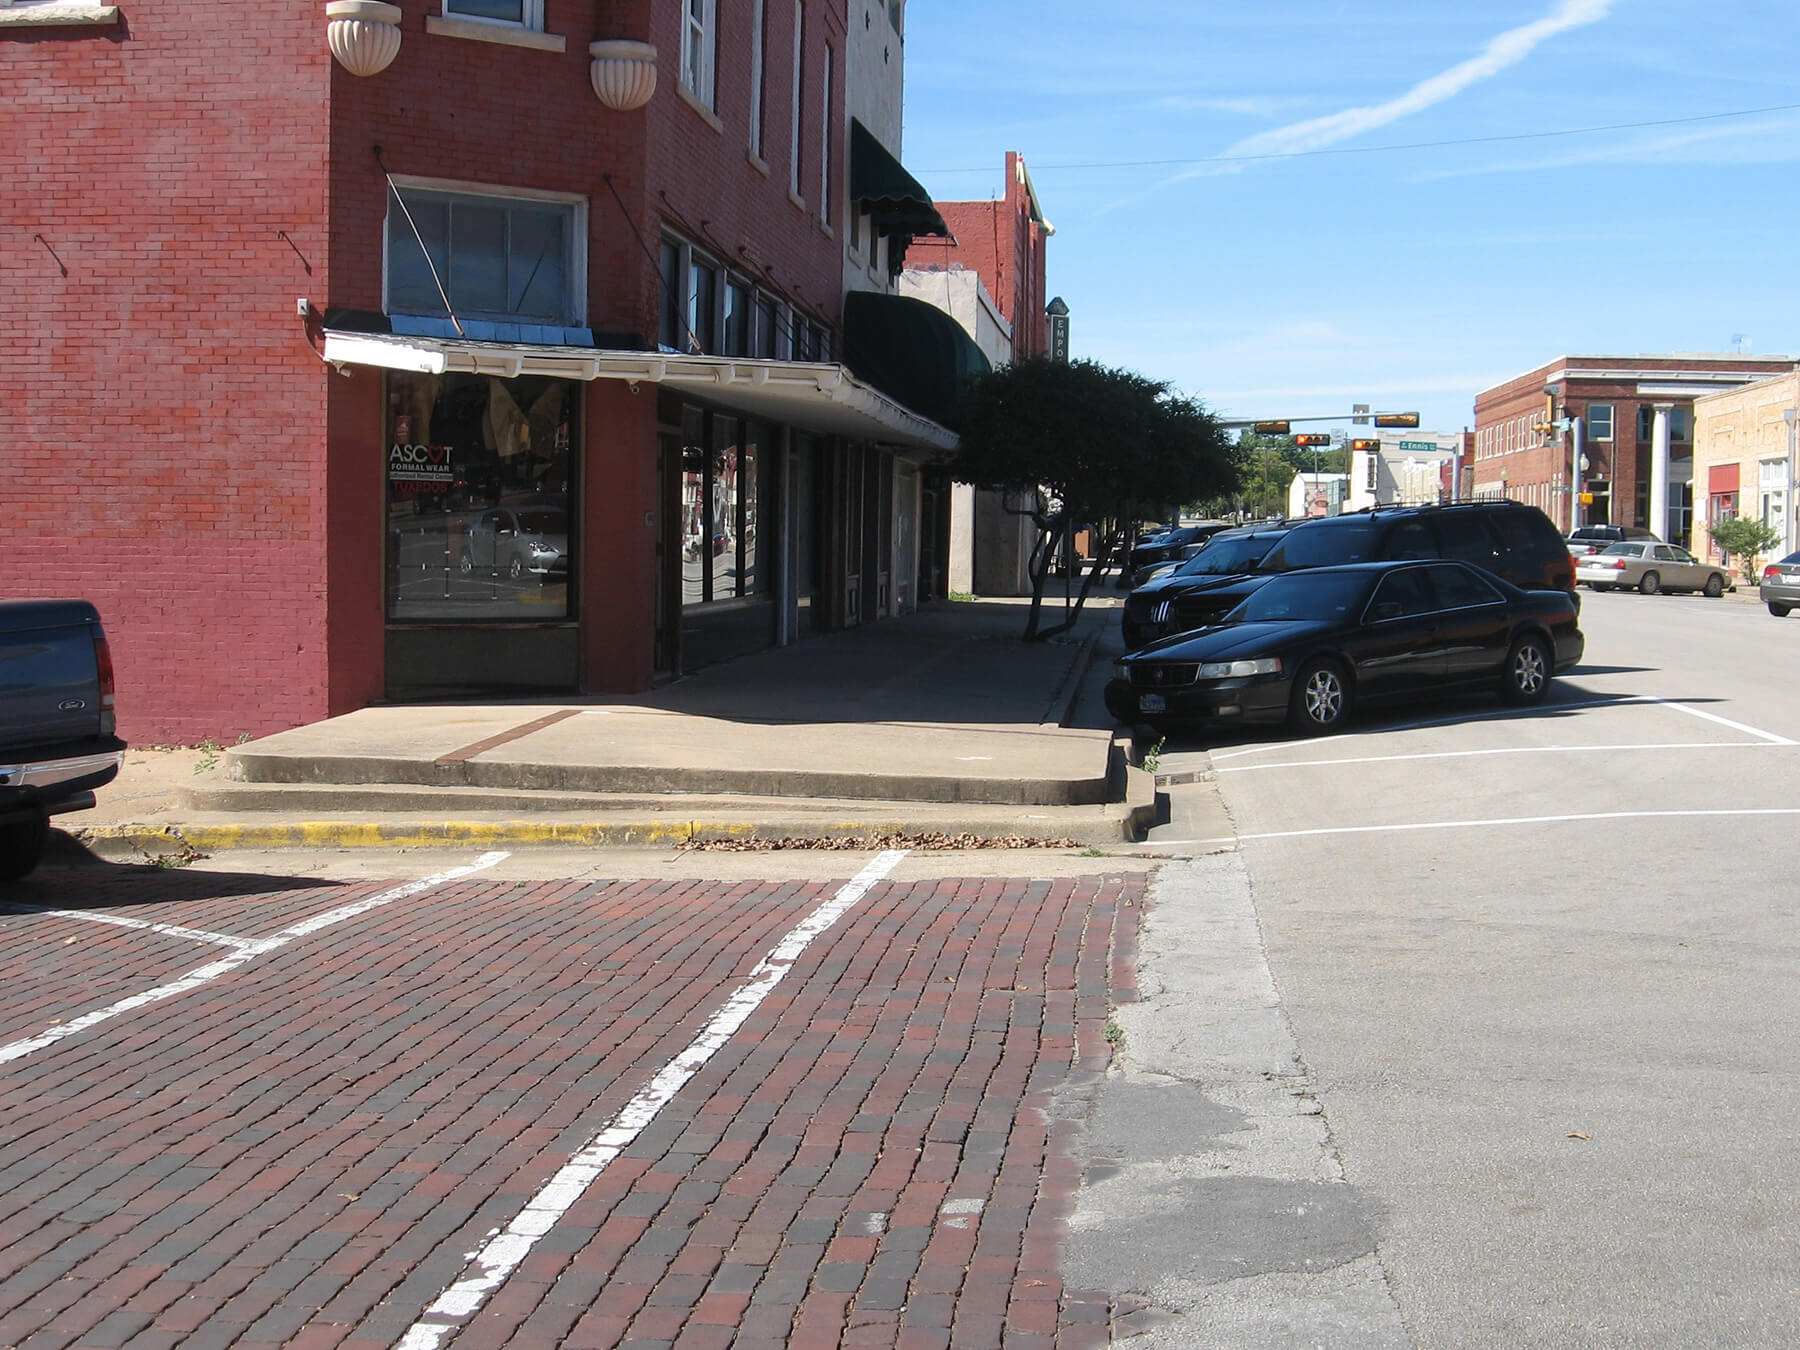 Cars parked on street in downtown Ennis prior to construction